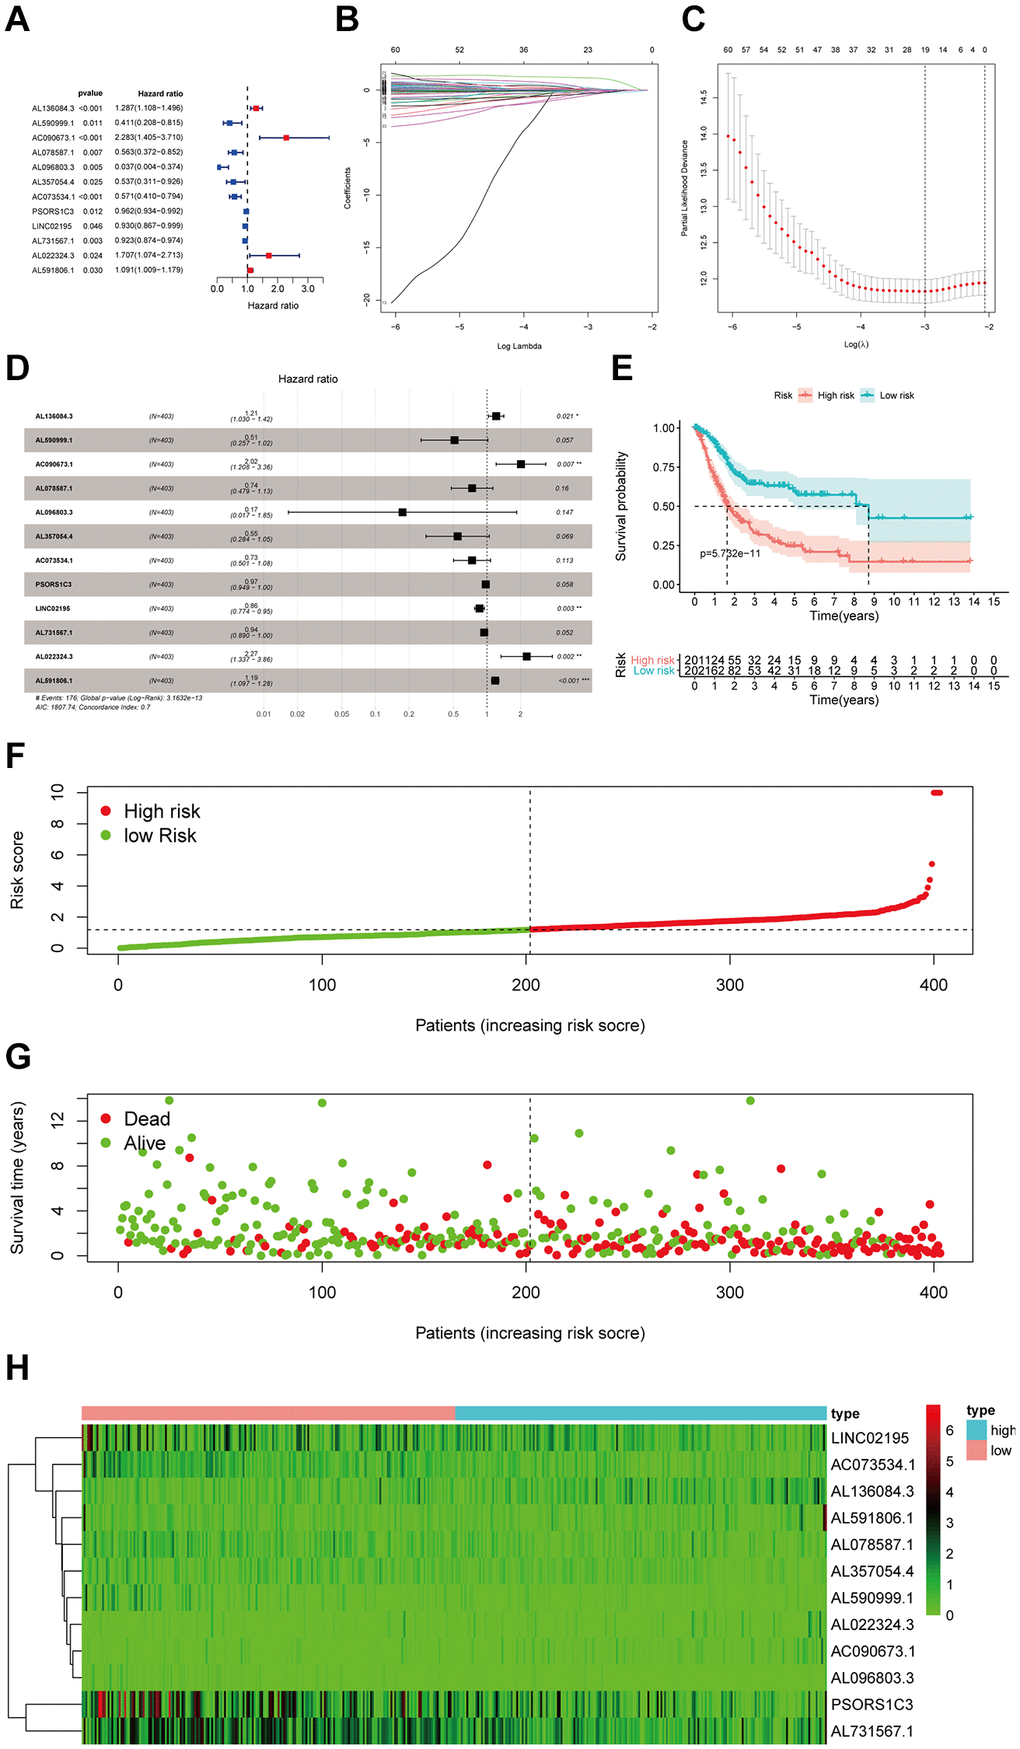 Identification and assessment of immune-related lncRNA prognostic signature for bladder cancer. (A) The HR and p-value of selected genes in the immune terms using the univariable Cox HR regression (Criteria: p-value B) The LASSO Cox analysis identified 19 lncRNAs most related to prognostics. (C) The 10-round cross-validation determined the optimal values of the penalty parameter. (D) The HR and p-value from the multivariable Cox HR regression prognostic signature. (E) Patients showed poor overall survival (OS) in the high-risk group (red) than those in the low-risk group (blue). (F) The risk curve of each sample reordered by risk score. (G) A sample survival overview using the scatter plot. The green dots represent survival and red represent death, respectively. (H) Heatmap showed the expression of the signature in the high-risk groups and low-risk groups. The pink and blue bars represented the low-risk group and the high-risk group. And the evolution from green to red represented the 0 to 6 level of gene expression.